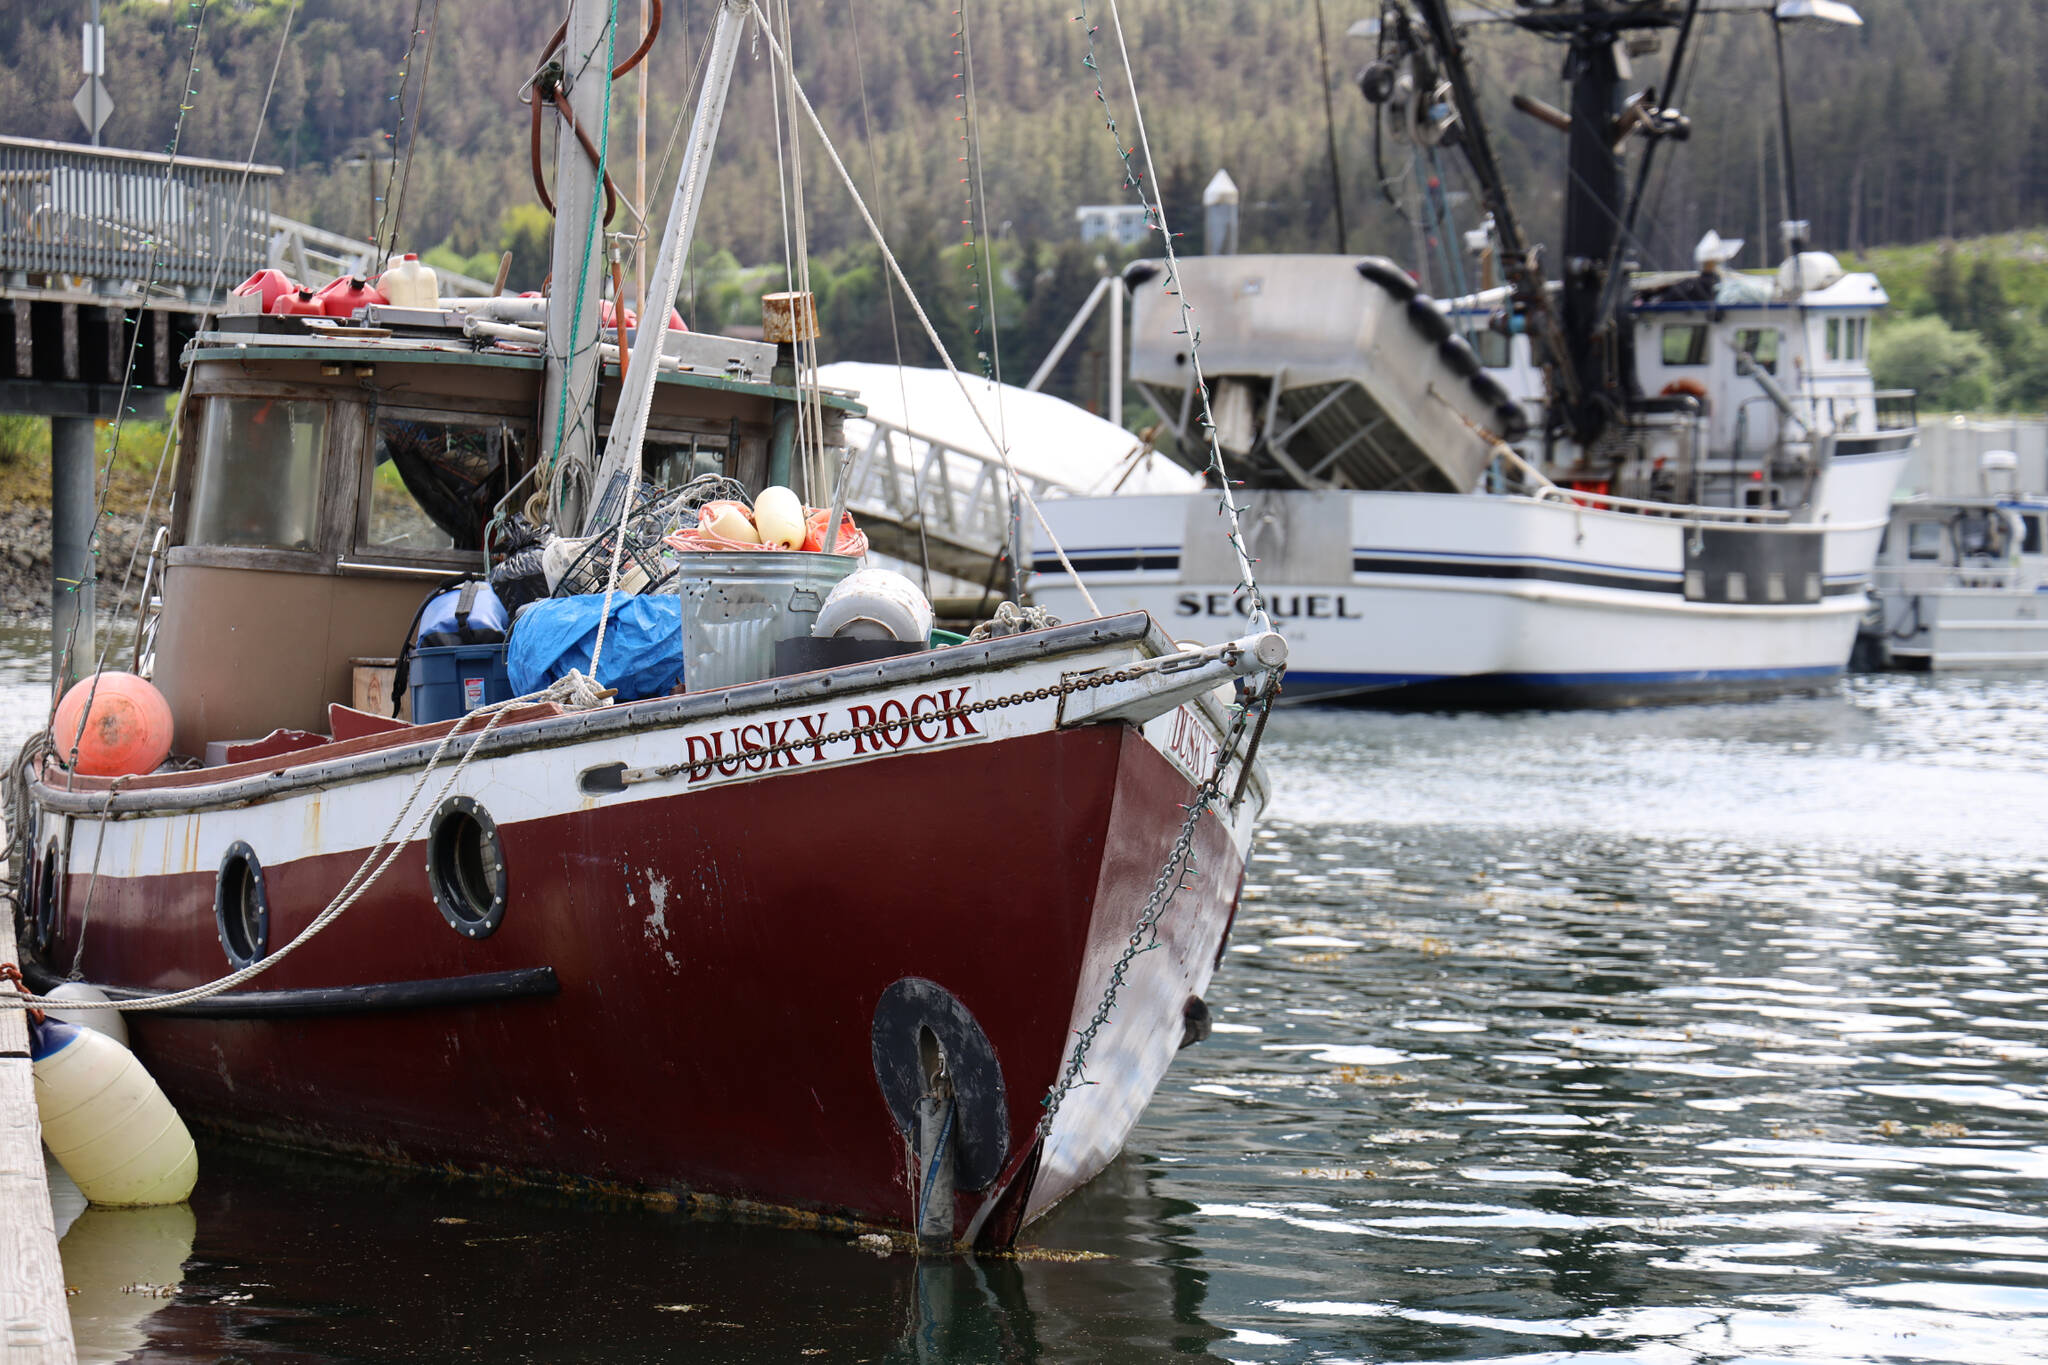 Clarise Larson / Juneau Empire File
The Dusky Rock sits at Aurora Harbor on the morning of Saturday, June 3. The vessel was towed there from Sandy Beach on the evening of Friday, June 2, after three people died within a three-day period aboard the vessel while anchored offshore.